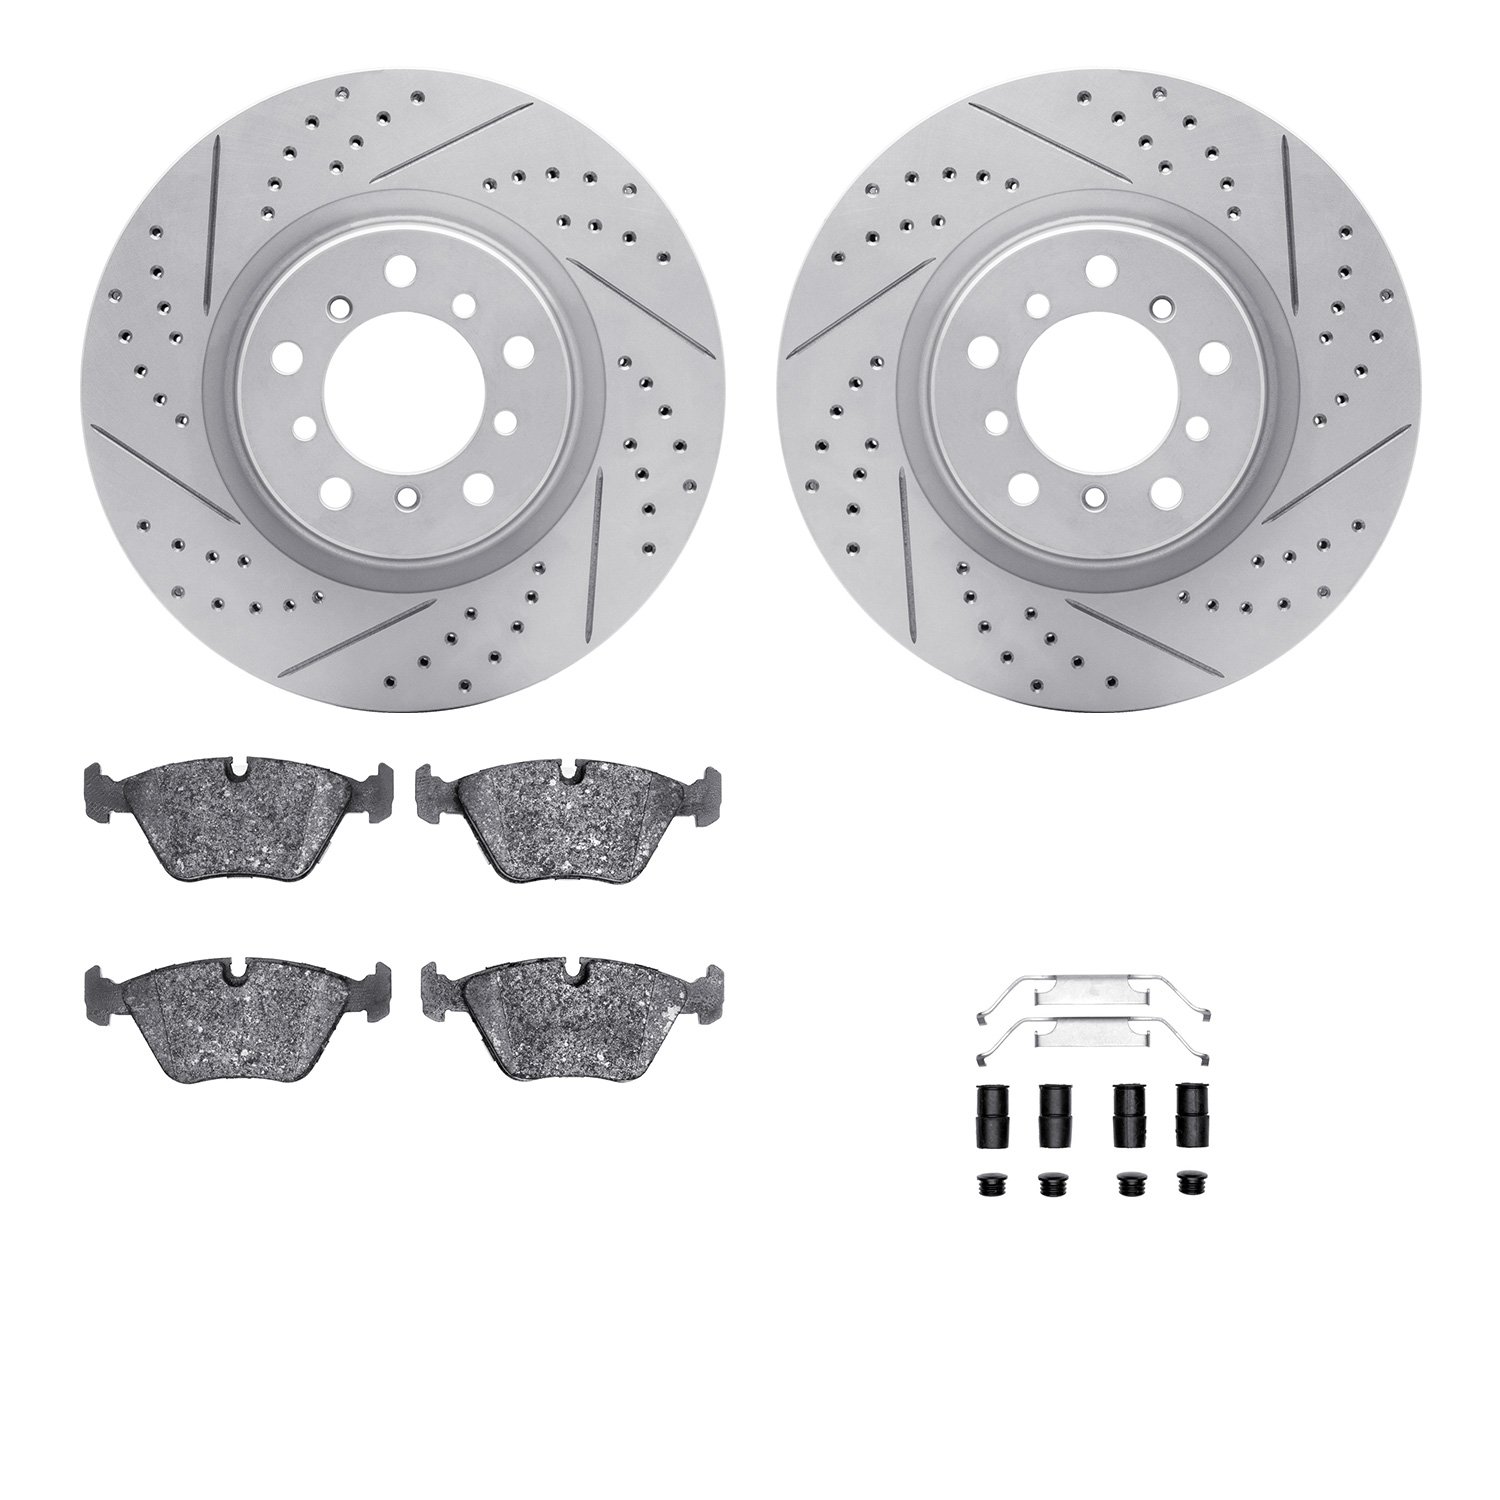 2512-31030 Geoperformance Drilled/Slotted Rotors w/5000 Advanced Brake Pads Kit & Hardware, 2001-2005 BMW, Position: Front